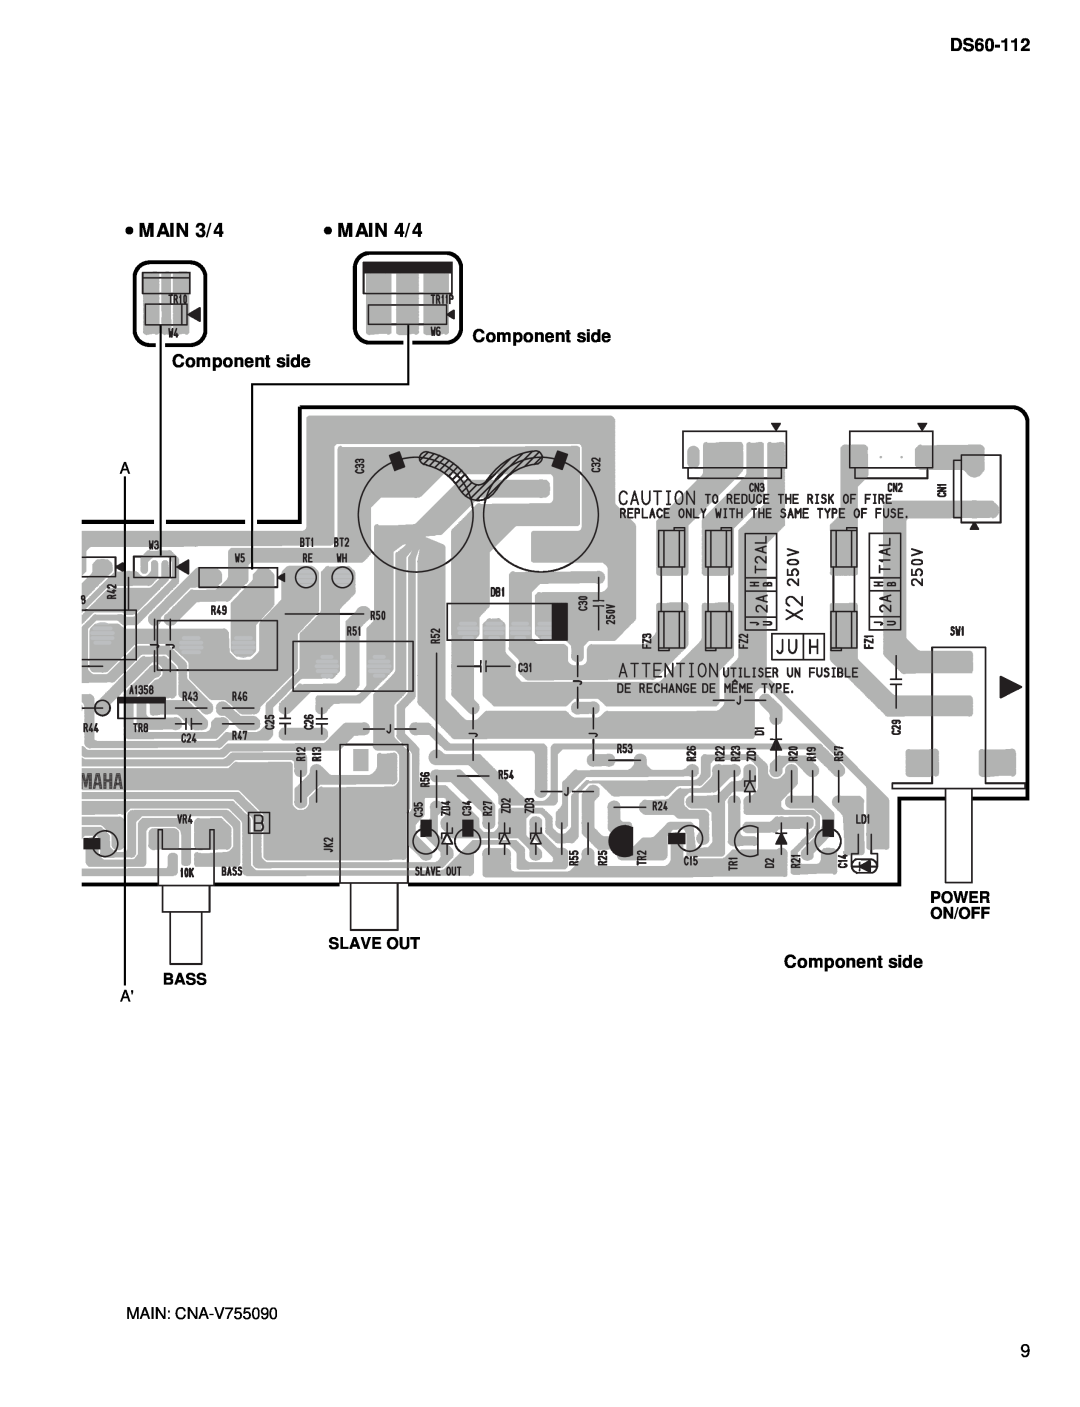 Yamaha DS60-112 service manual MAIN 3/4, MAIN 4/4, Component side Component side, Power On/Off Slave Out, Bass 